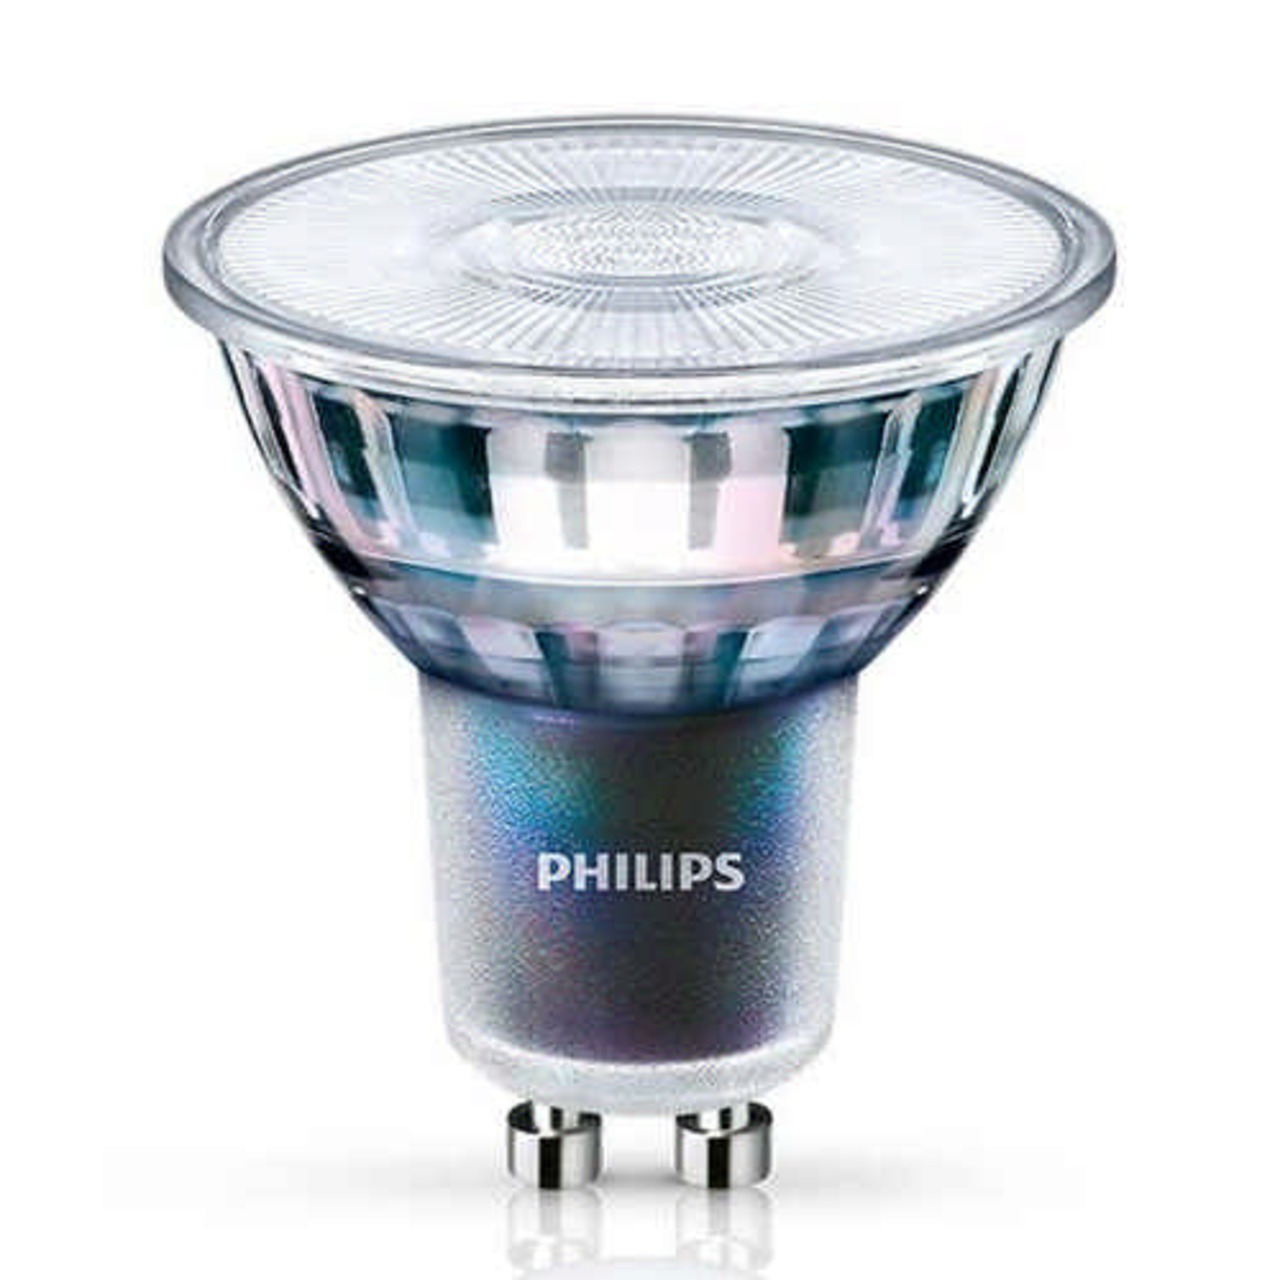 Philips MASTER LEDspot ExpertColor 3-9-W-GU10-LED-Lampe- 280 lm- 97 Ra- 36- warmweiss- dimmbar